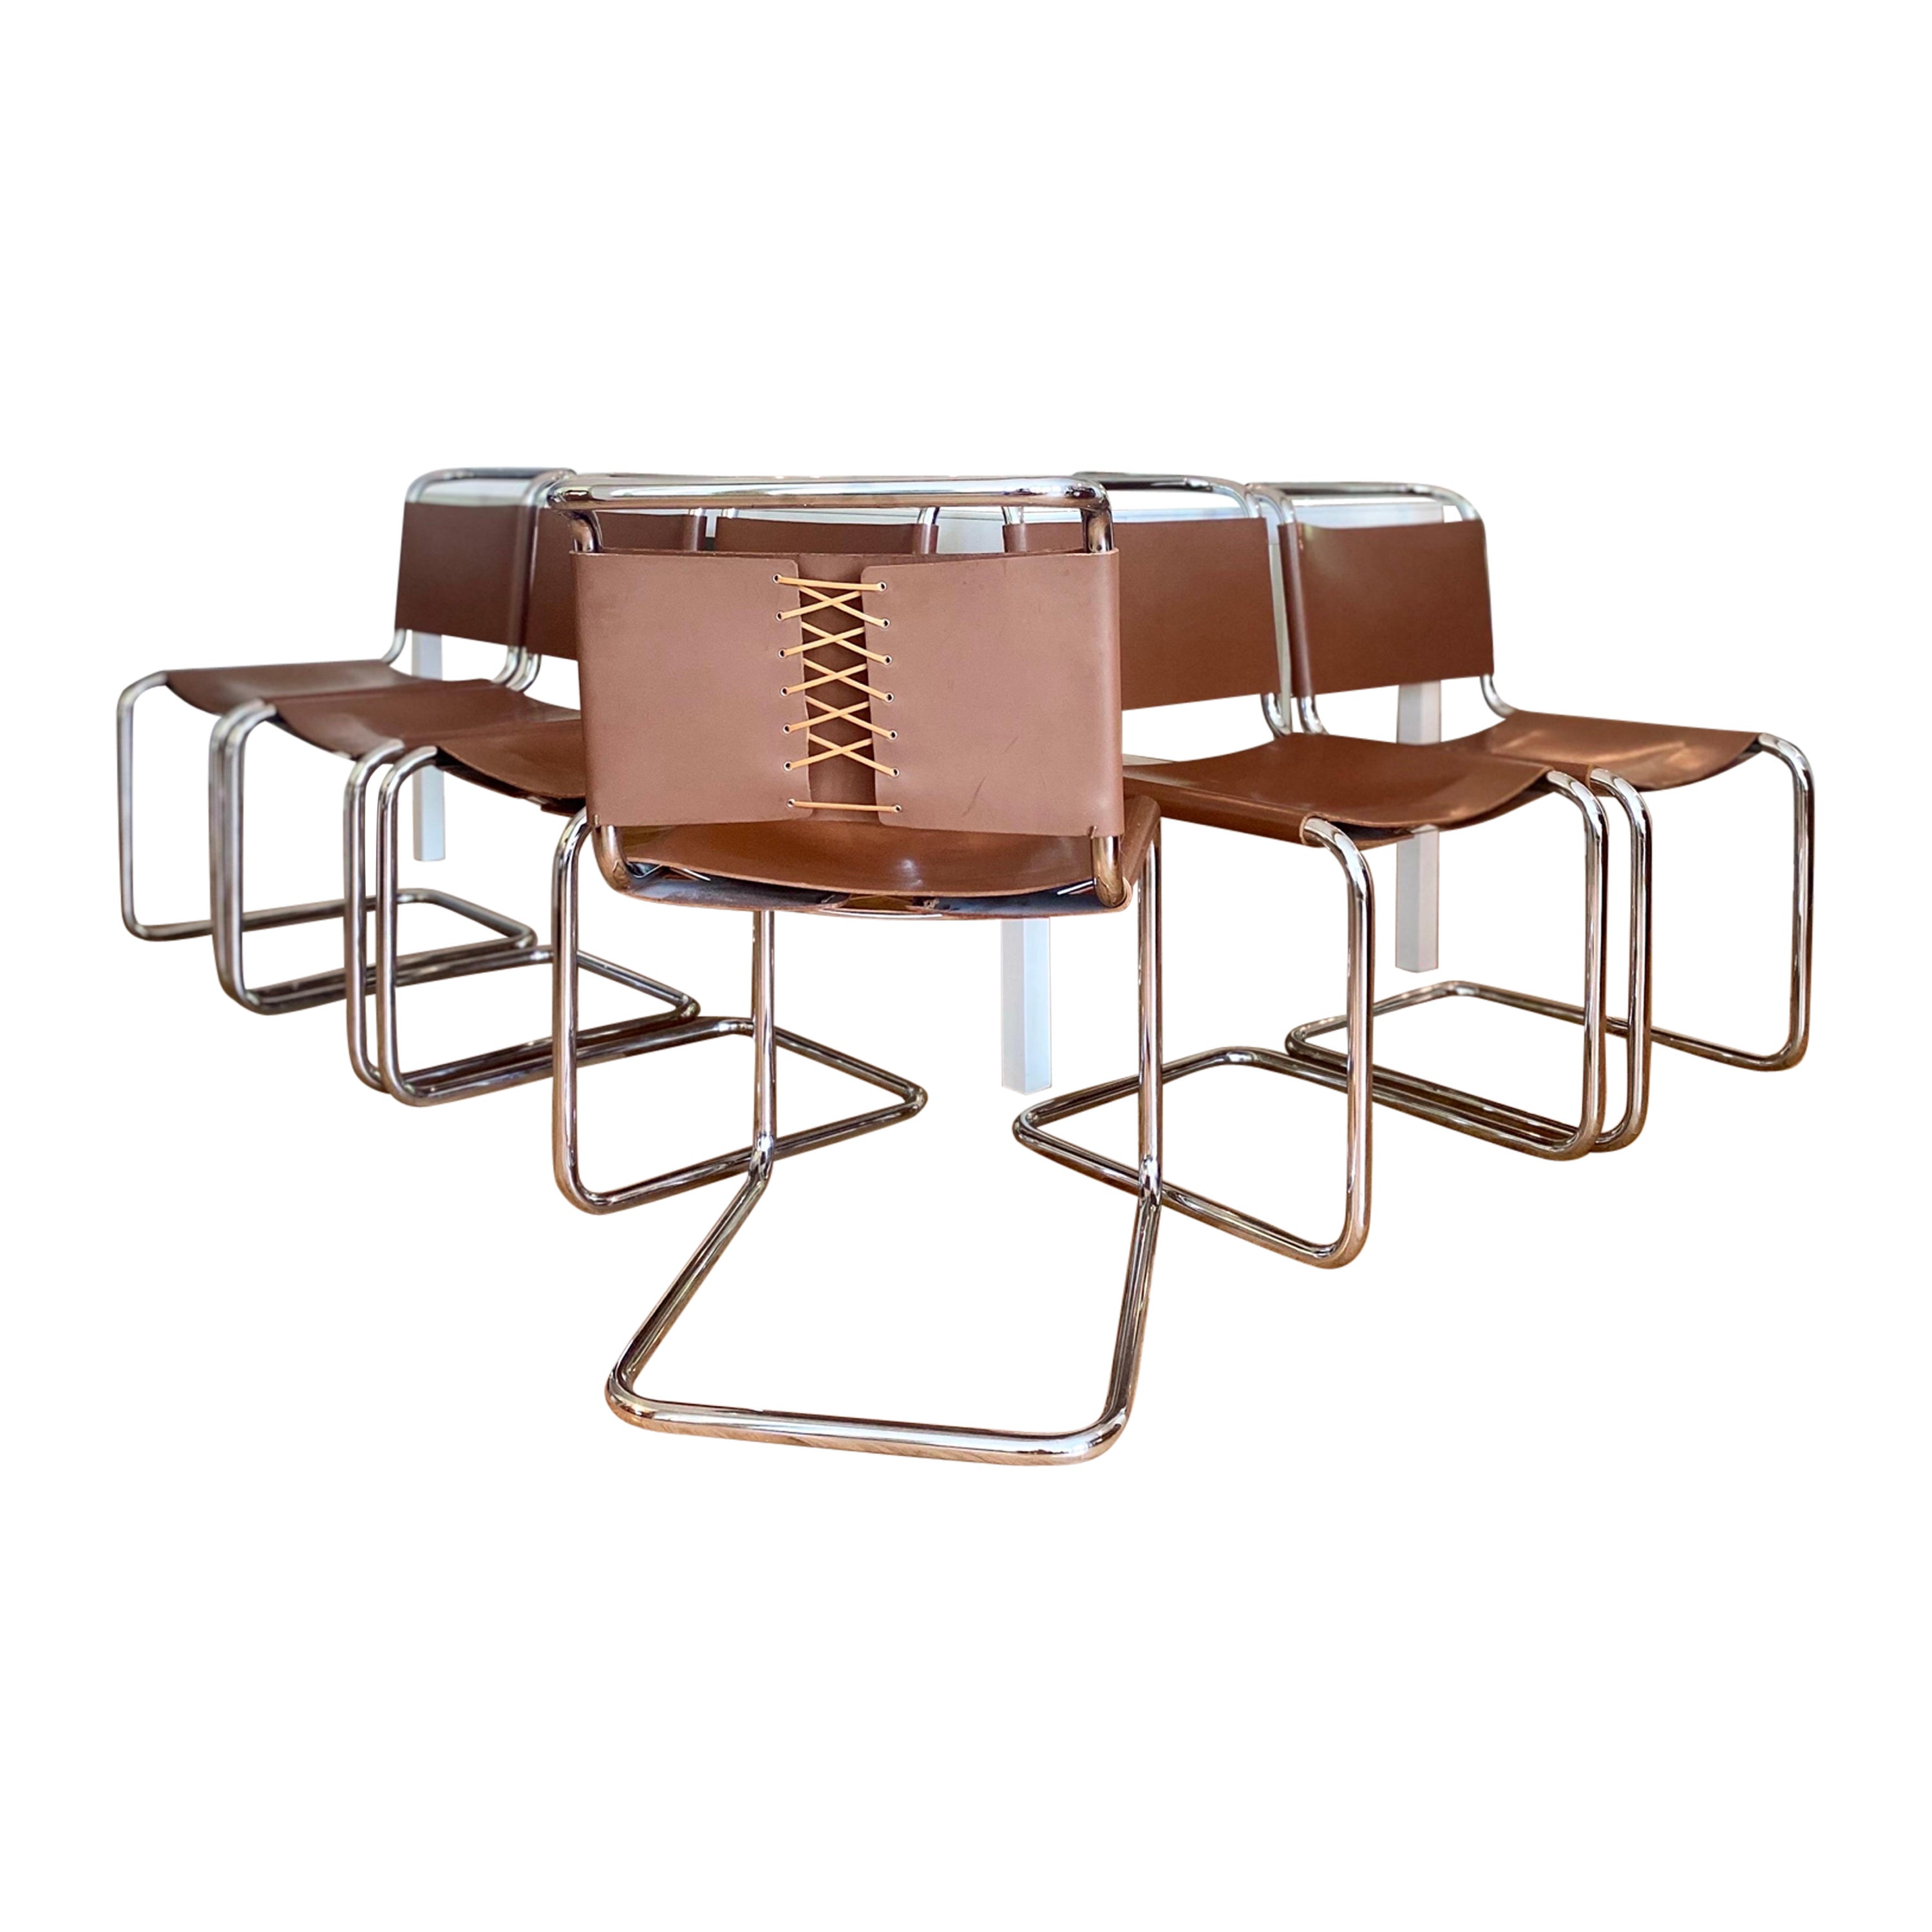 Set of 6 Knoll Spoleto Dining Chairs in Rich Cognac